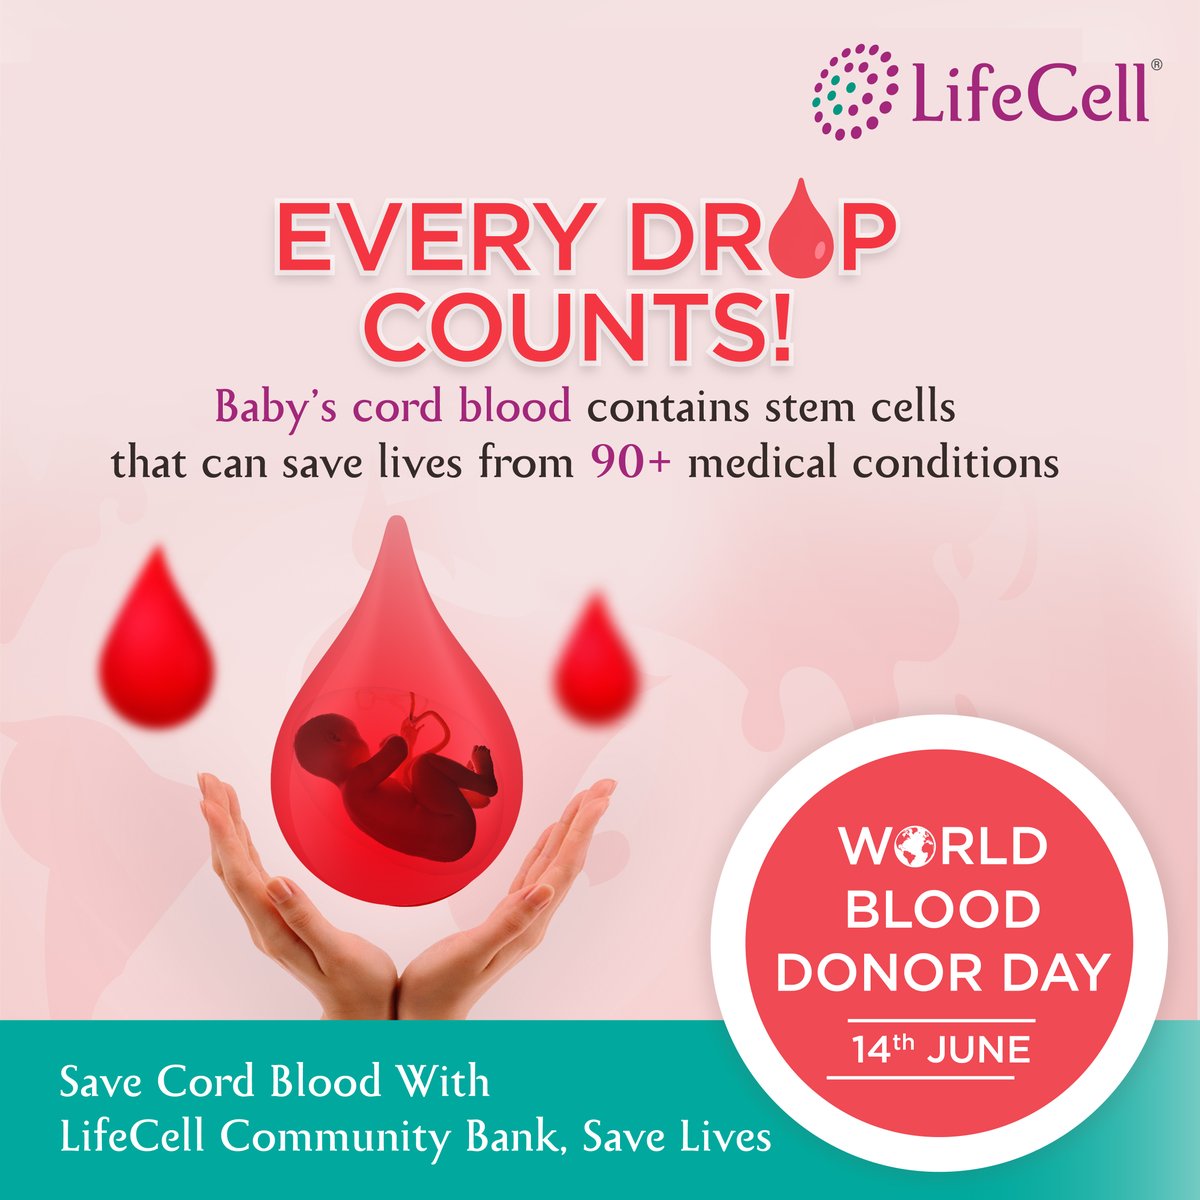 #Blooddonations save millions of lives every year. This #WorldBloodDonor Day, let's not forget another precious source of life-saving cells – cord blood. By preserving your baby's #cordblood, you can secure a potential lifeline for your family and others in need.